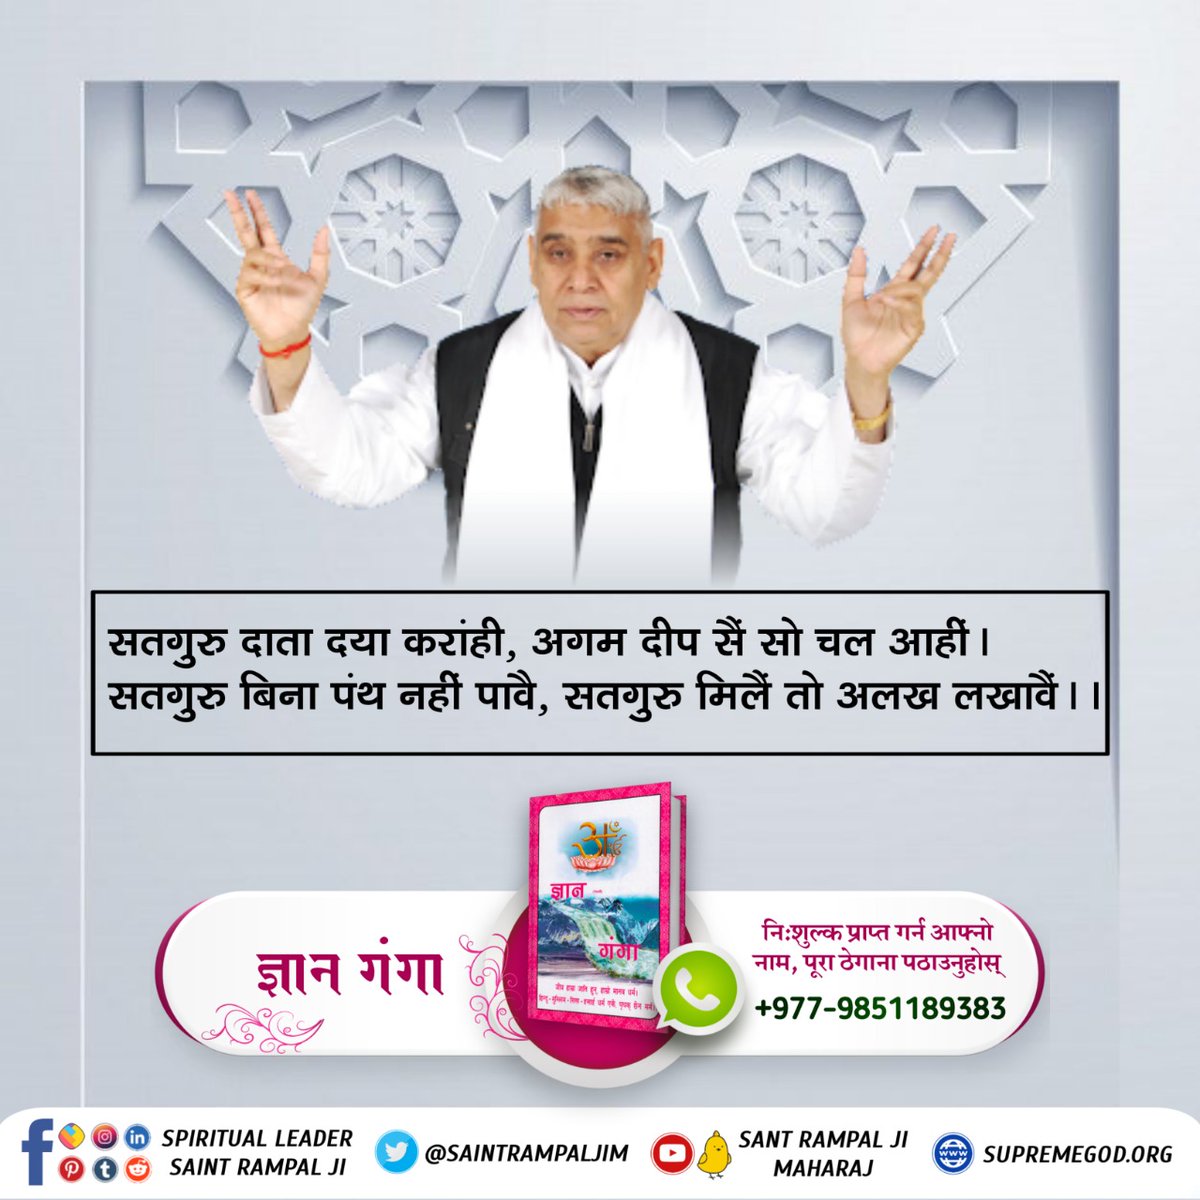 #GodMorningFriday 
True Guru provides true way of worship mentioned in our holy scriptures.